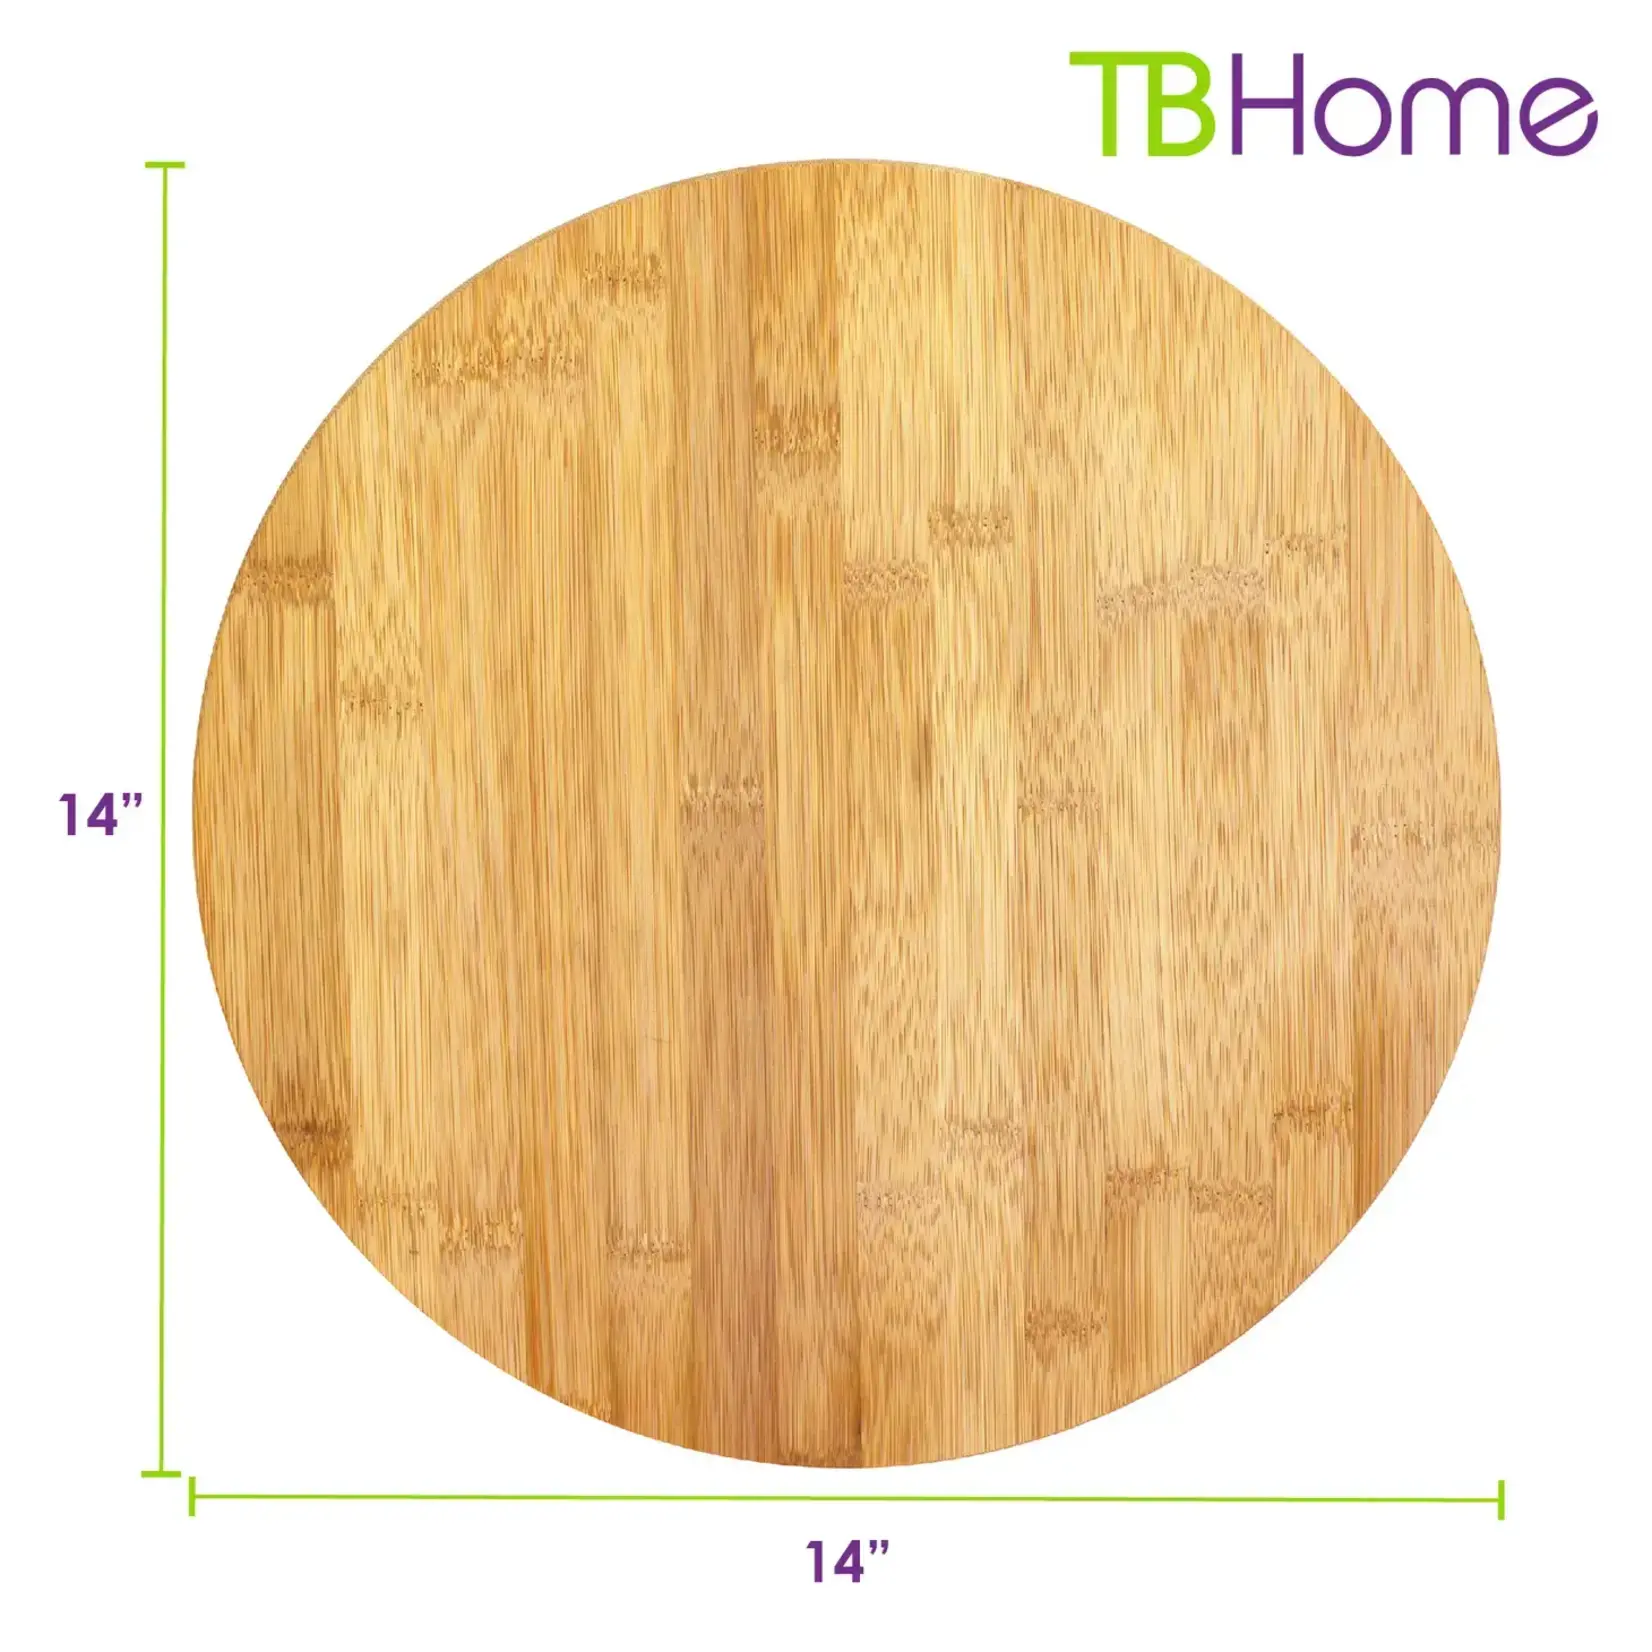 Totally Bamboo 14" Banboo Lazy Susan Turntable